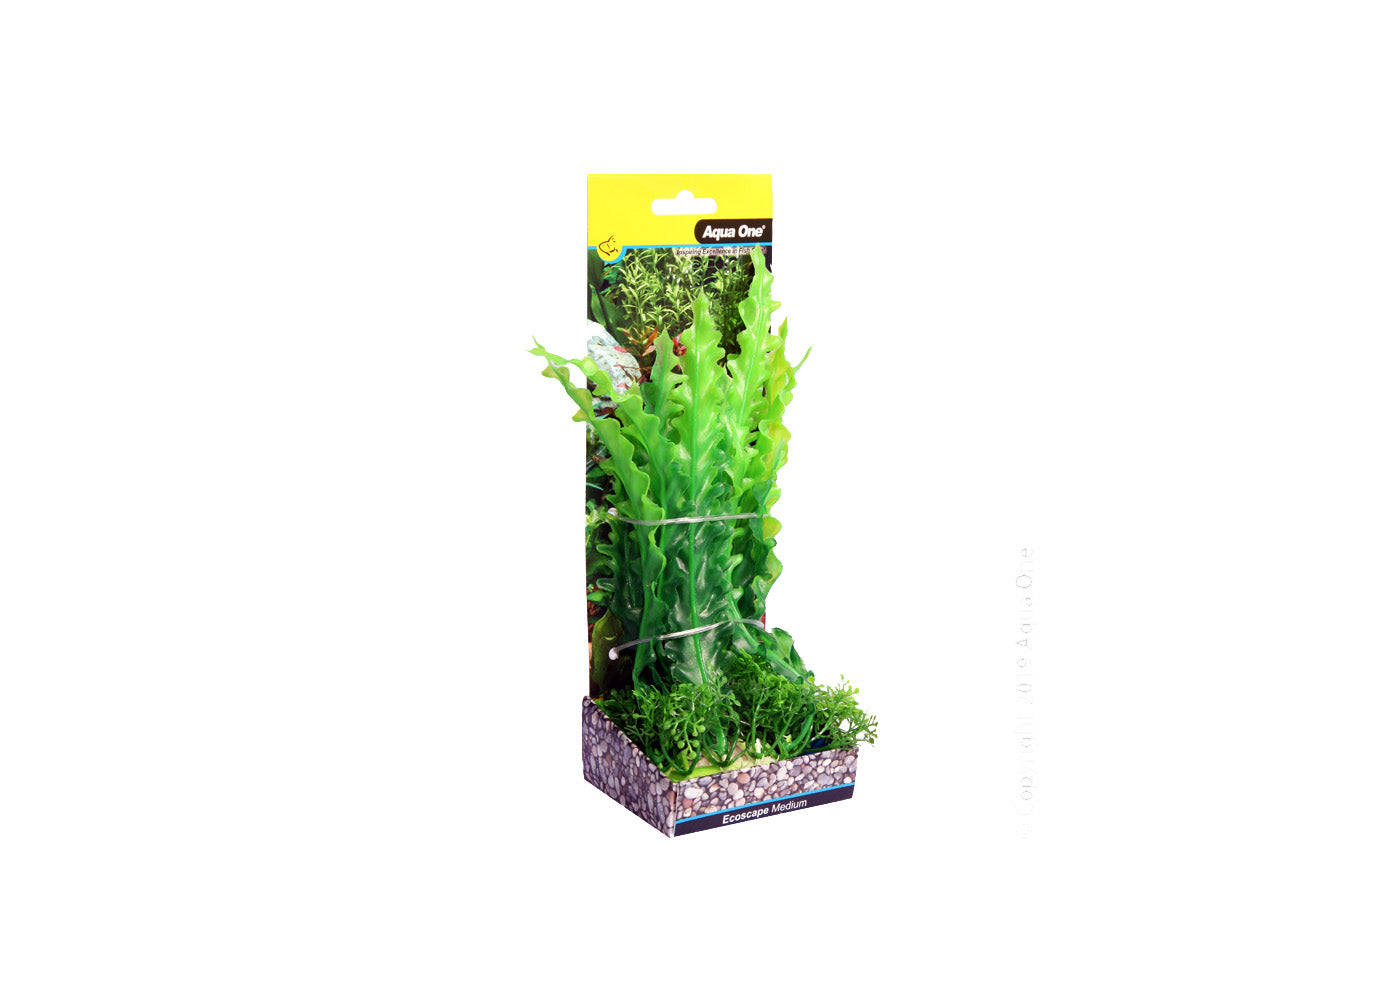 Aqua One Ecoscape Ruffled Lace Plant packaging